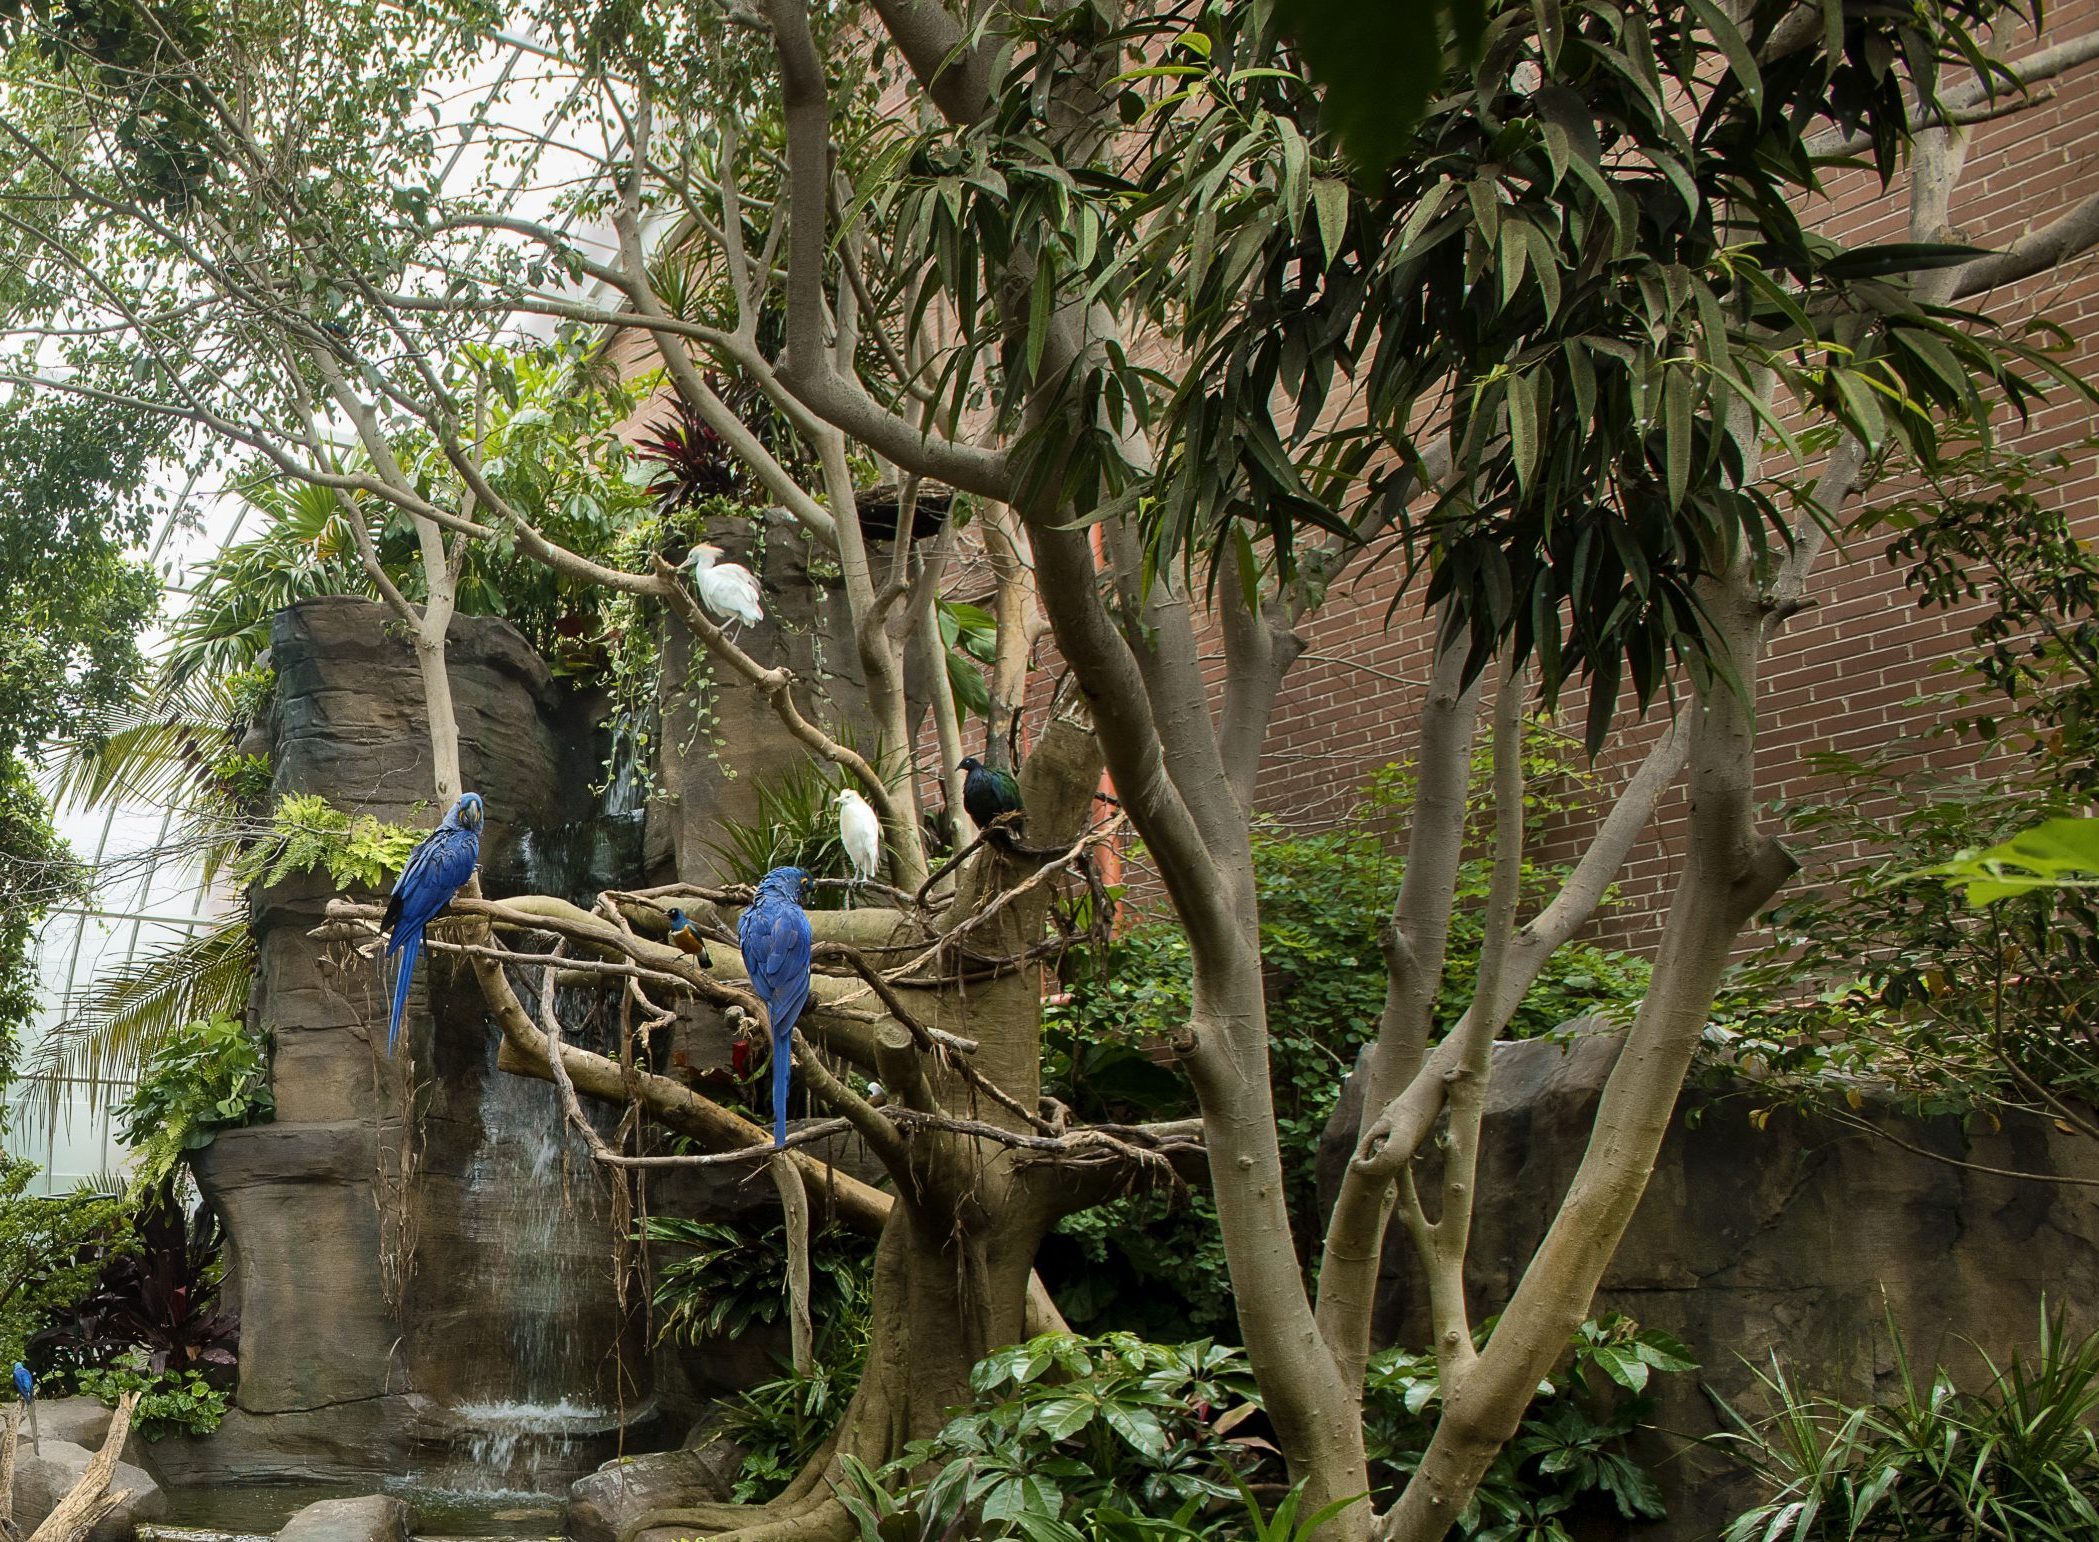 Several types of birds perched on tree branches in front of the waterfall in the Tropical Rainforest at the National Aviary